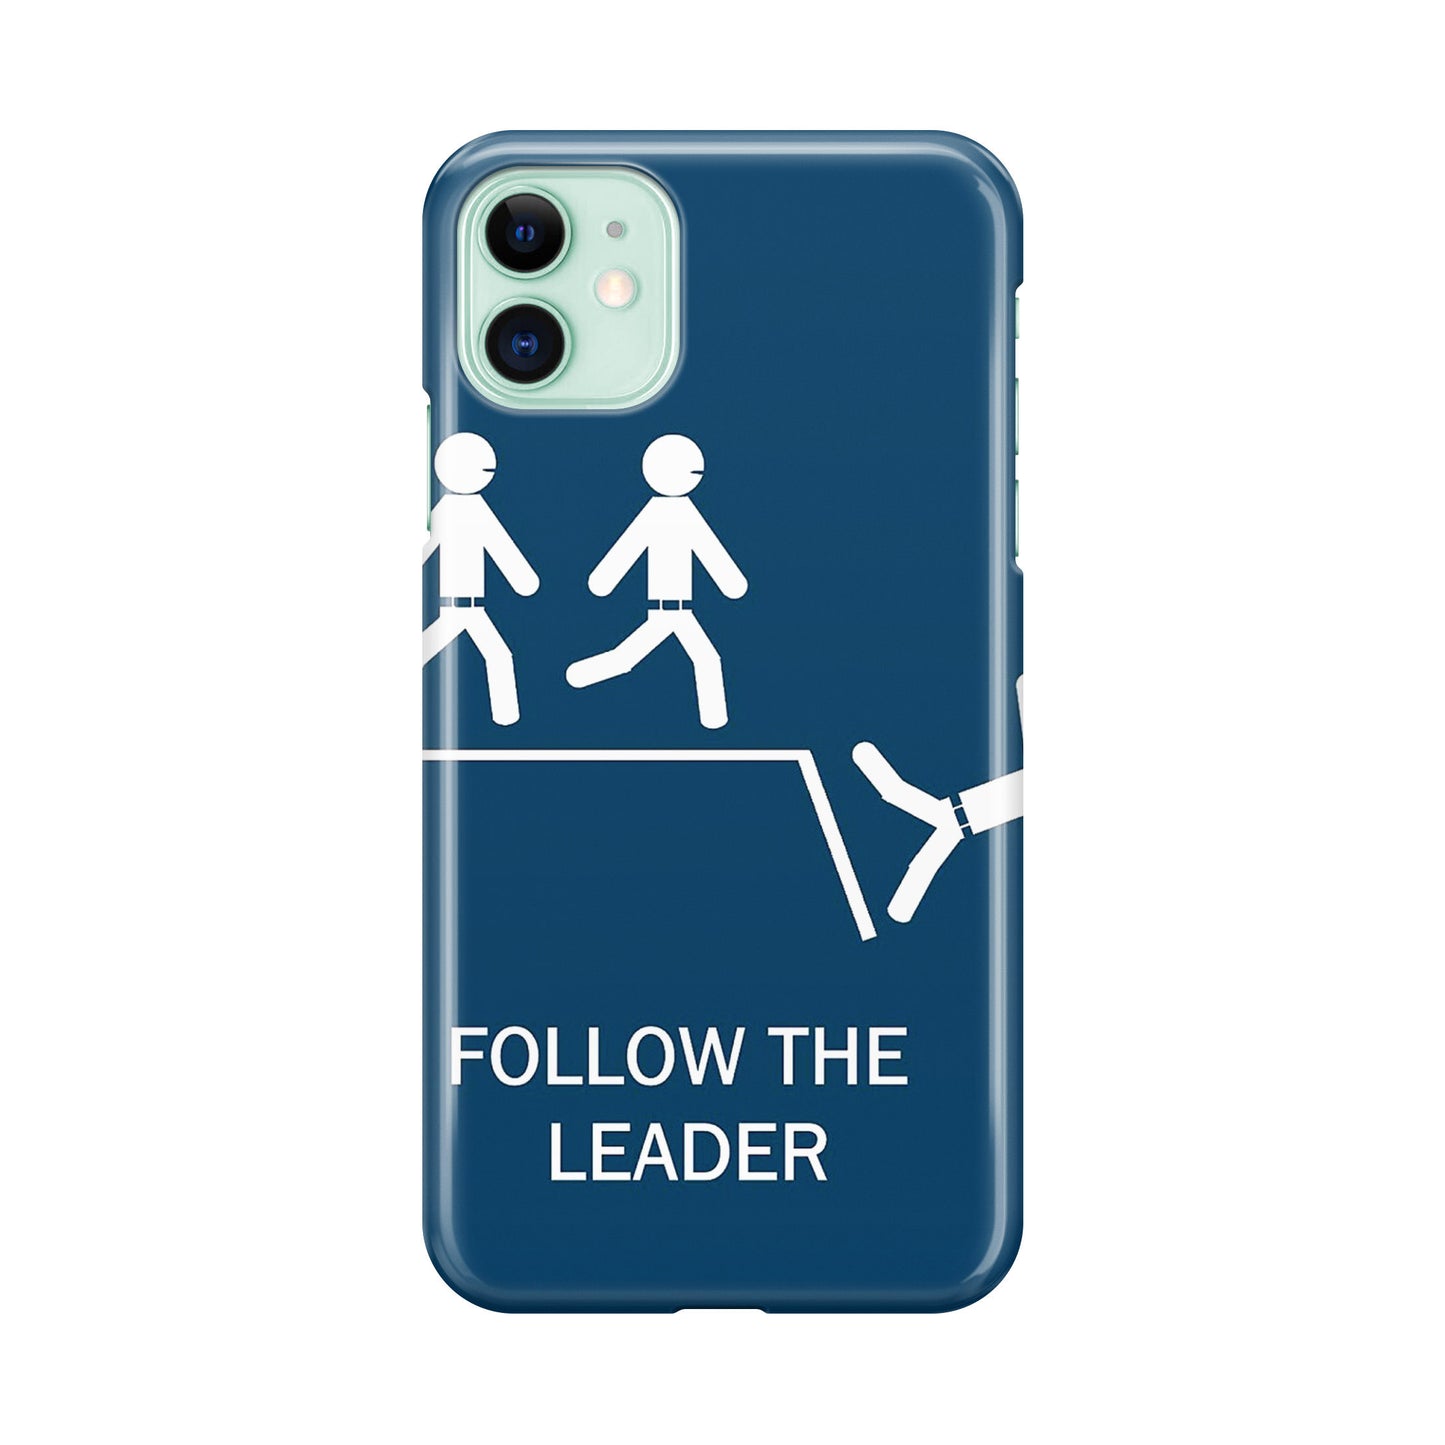 Follow The Leader iPhone 12 Case